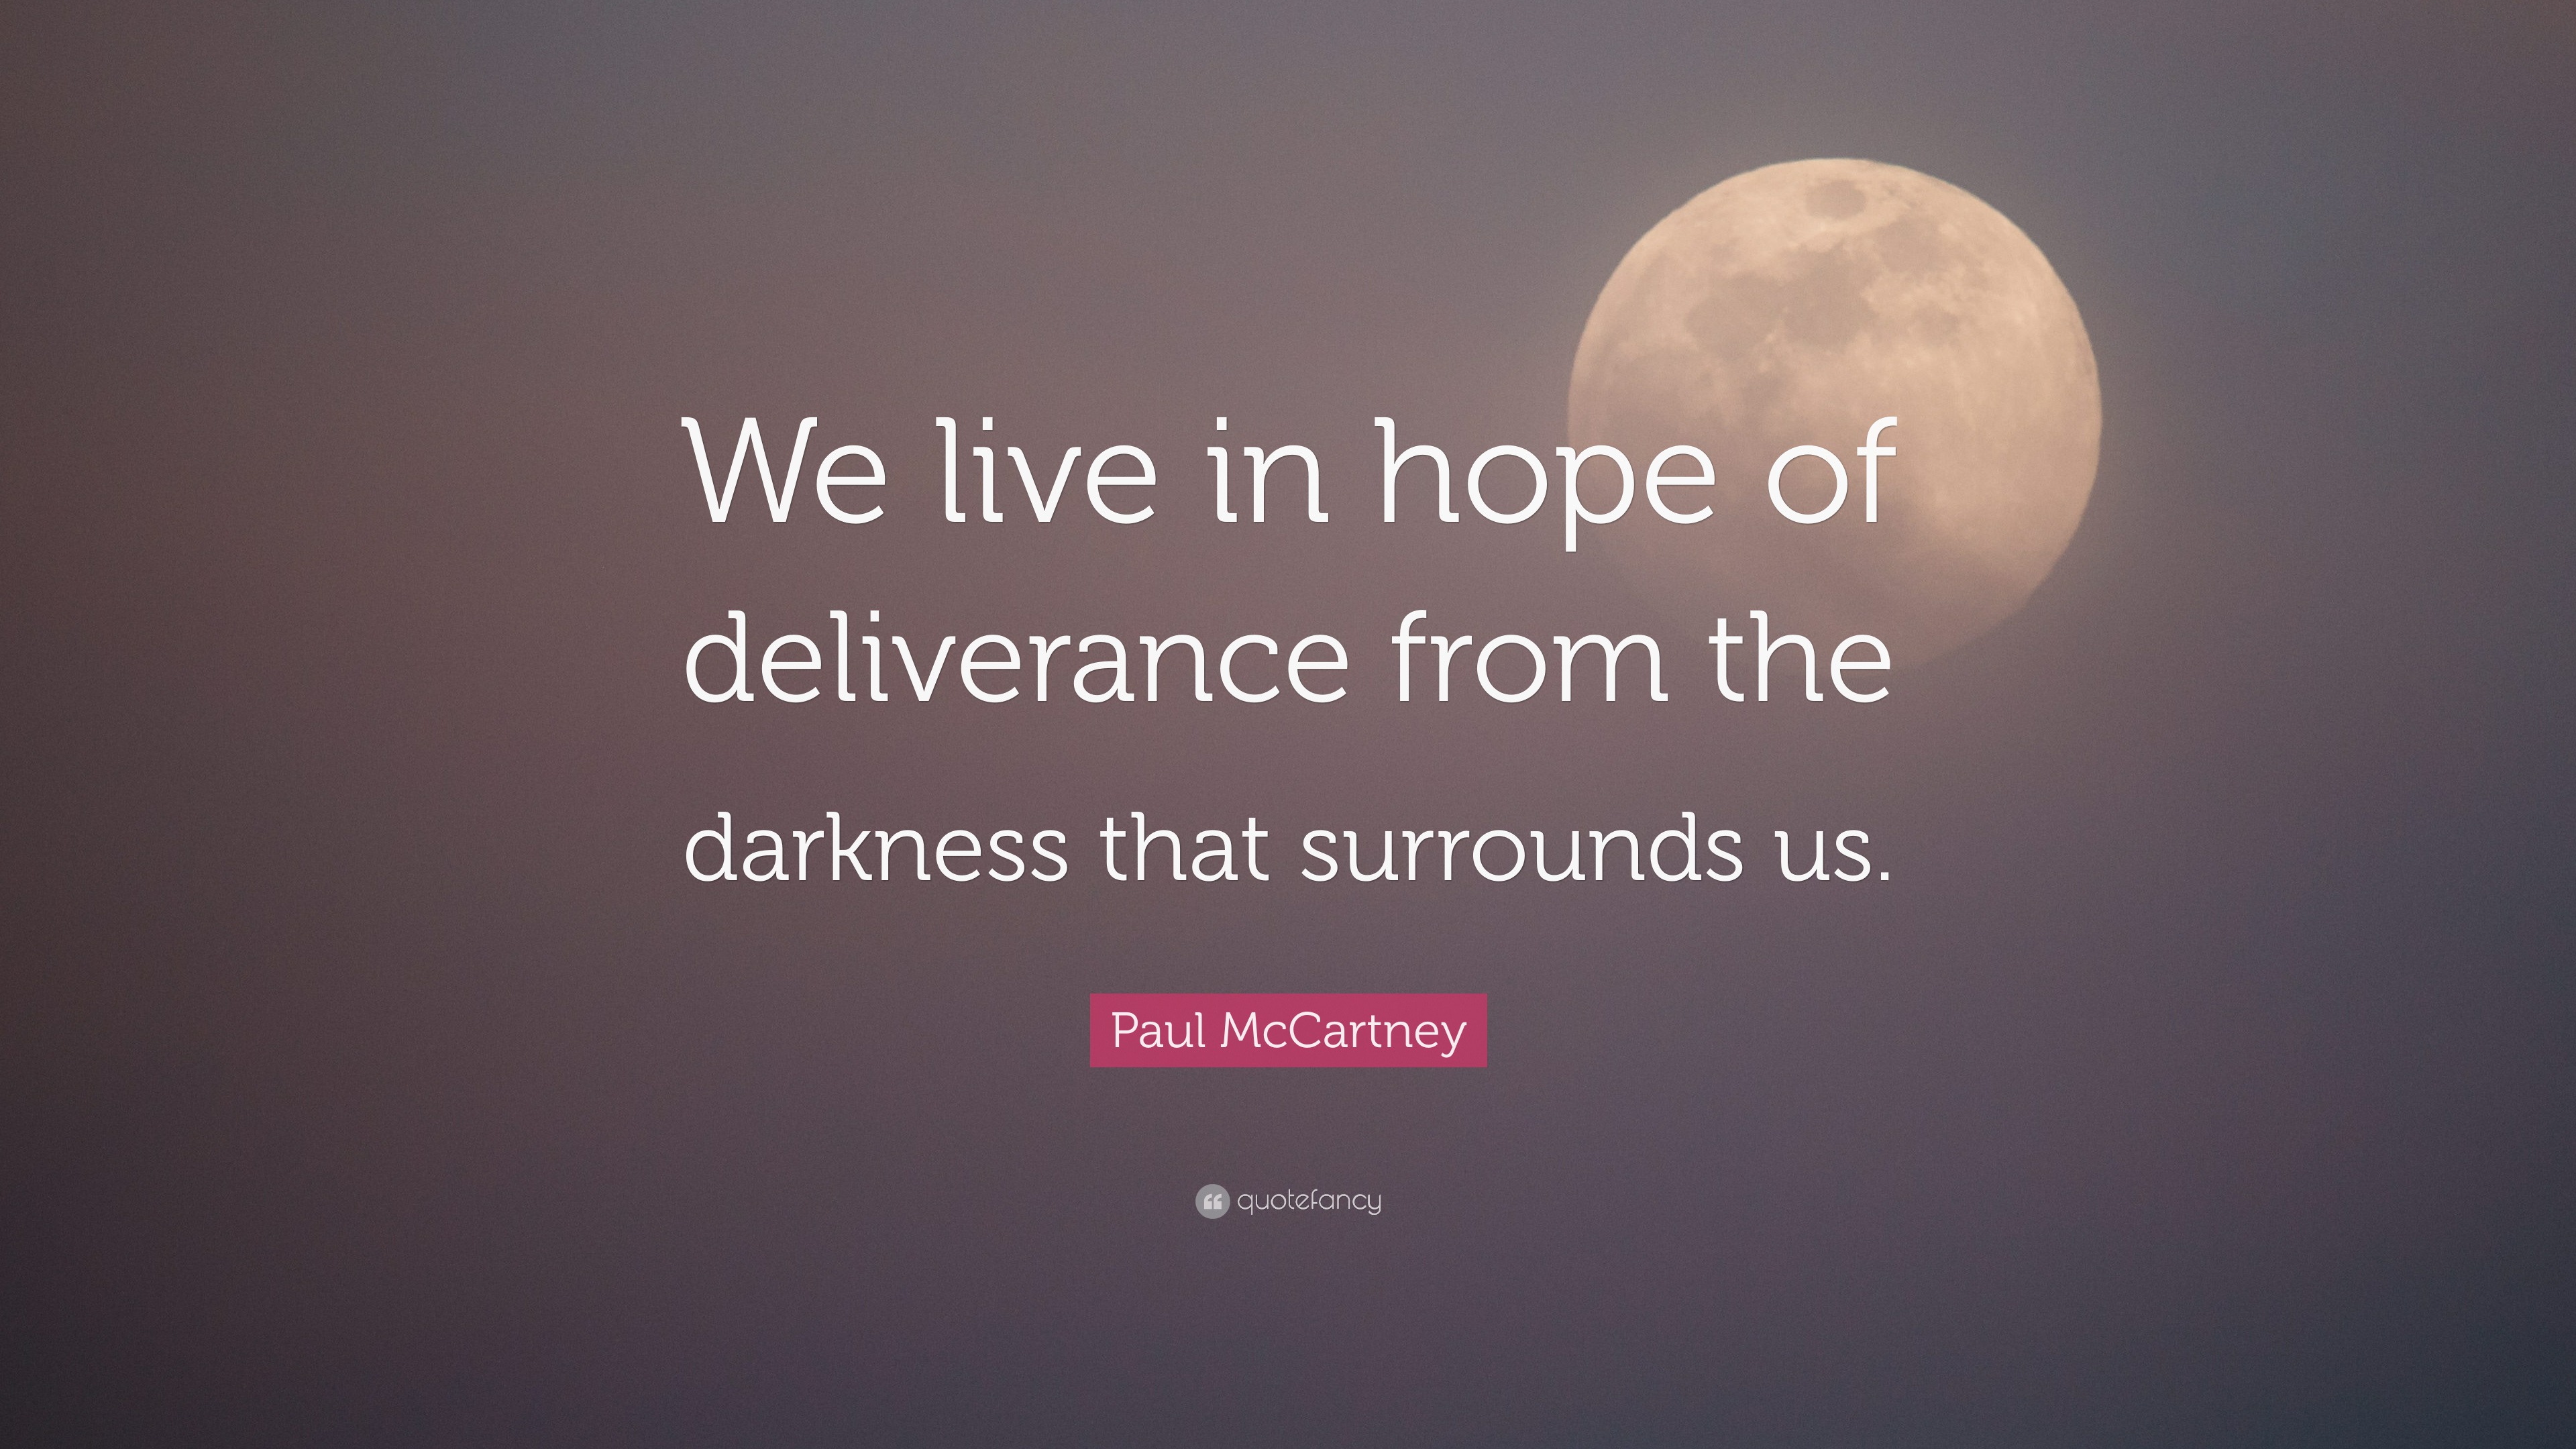 Paul McCartney Quote: “We live in hope of deliverance from the darkness ...